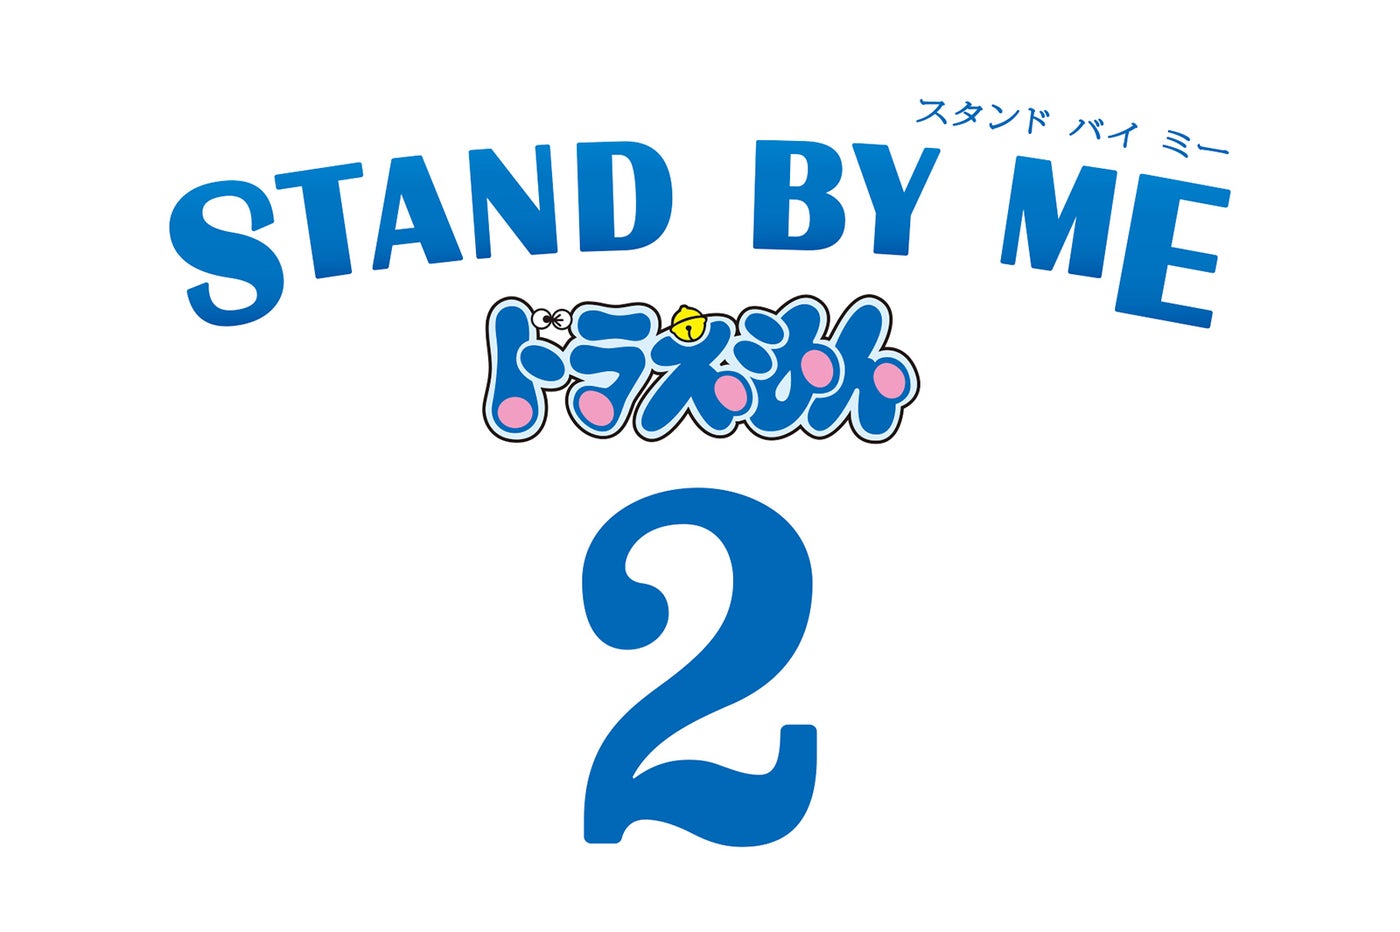 『STAND BY ME ドラえもん 2』（C）Fujiko Pro／2020 STAND BY ME Doraemon 2 Film Partners